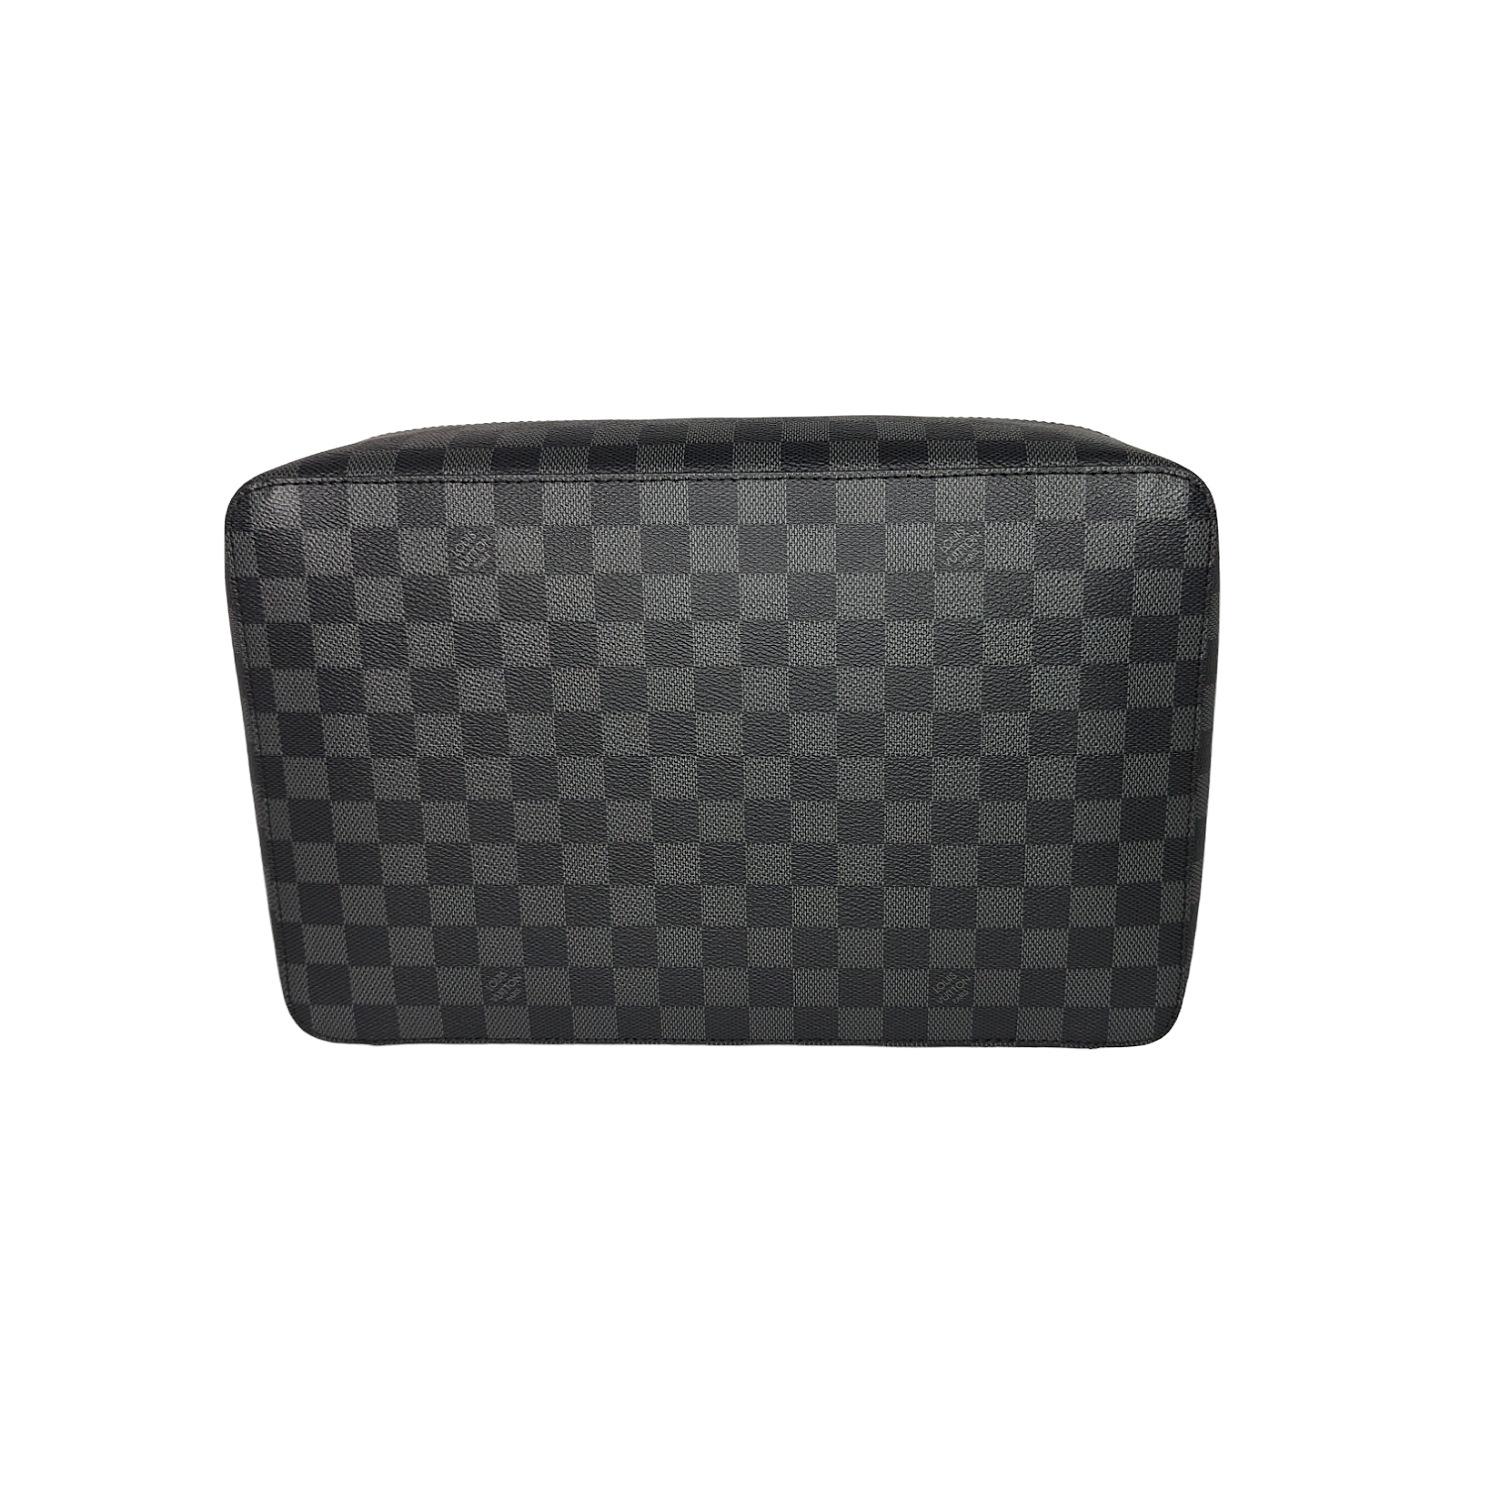 The Packing Cube GM in Damier Graphite canvas with colored leather trim is Louis Vuitton’s latest contribution to the Art of Packing. Although designed for organizing the interior of luggage, it can also be used to store items.

Designer: Louis